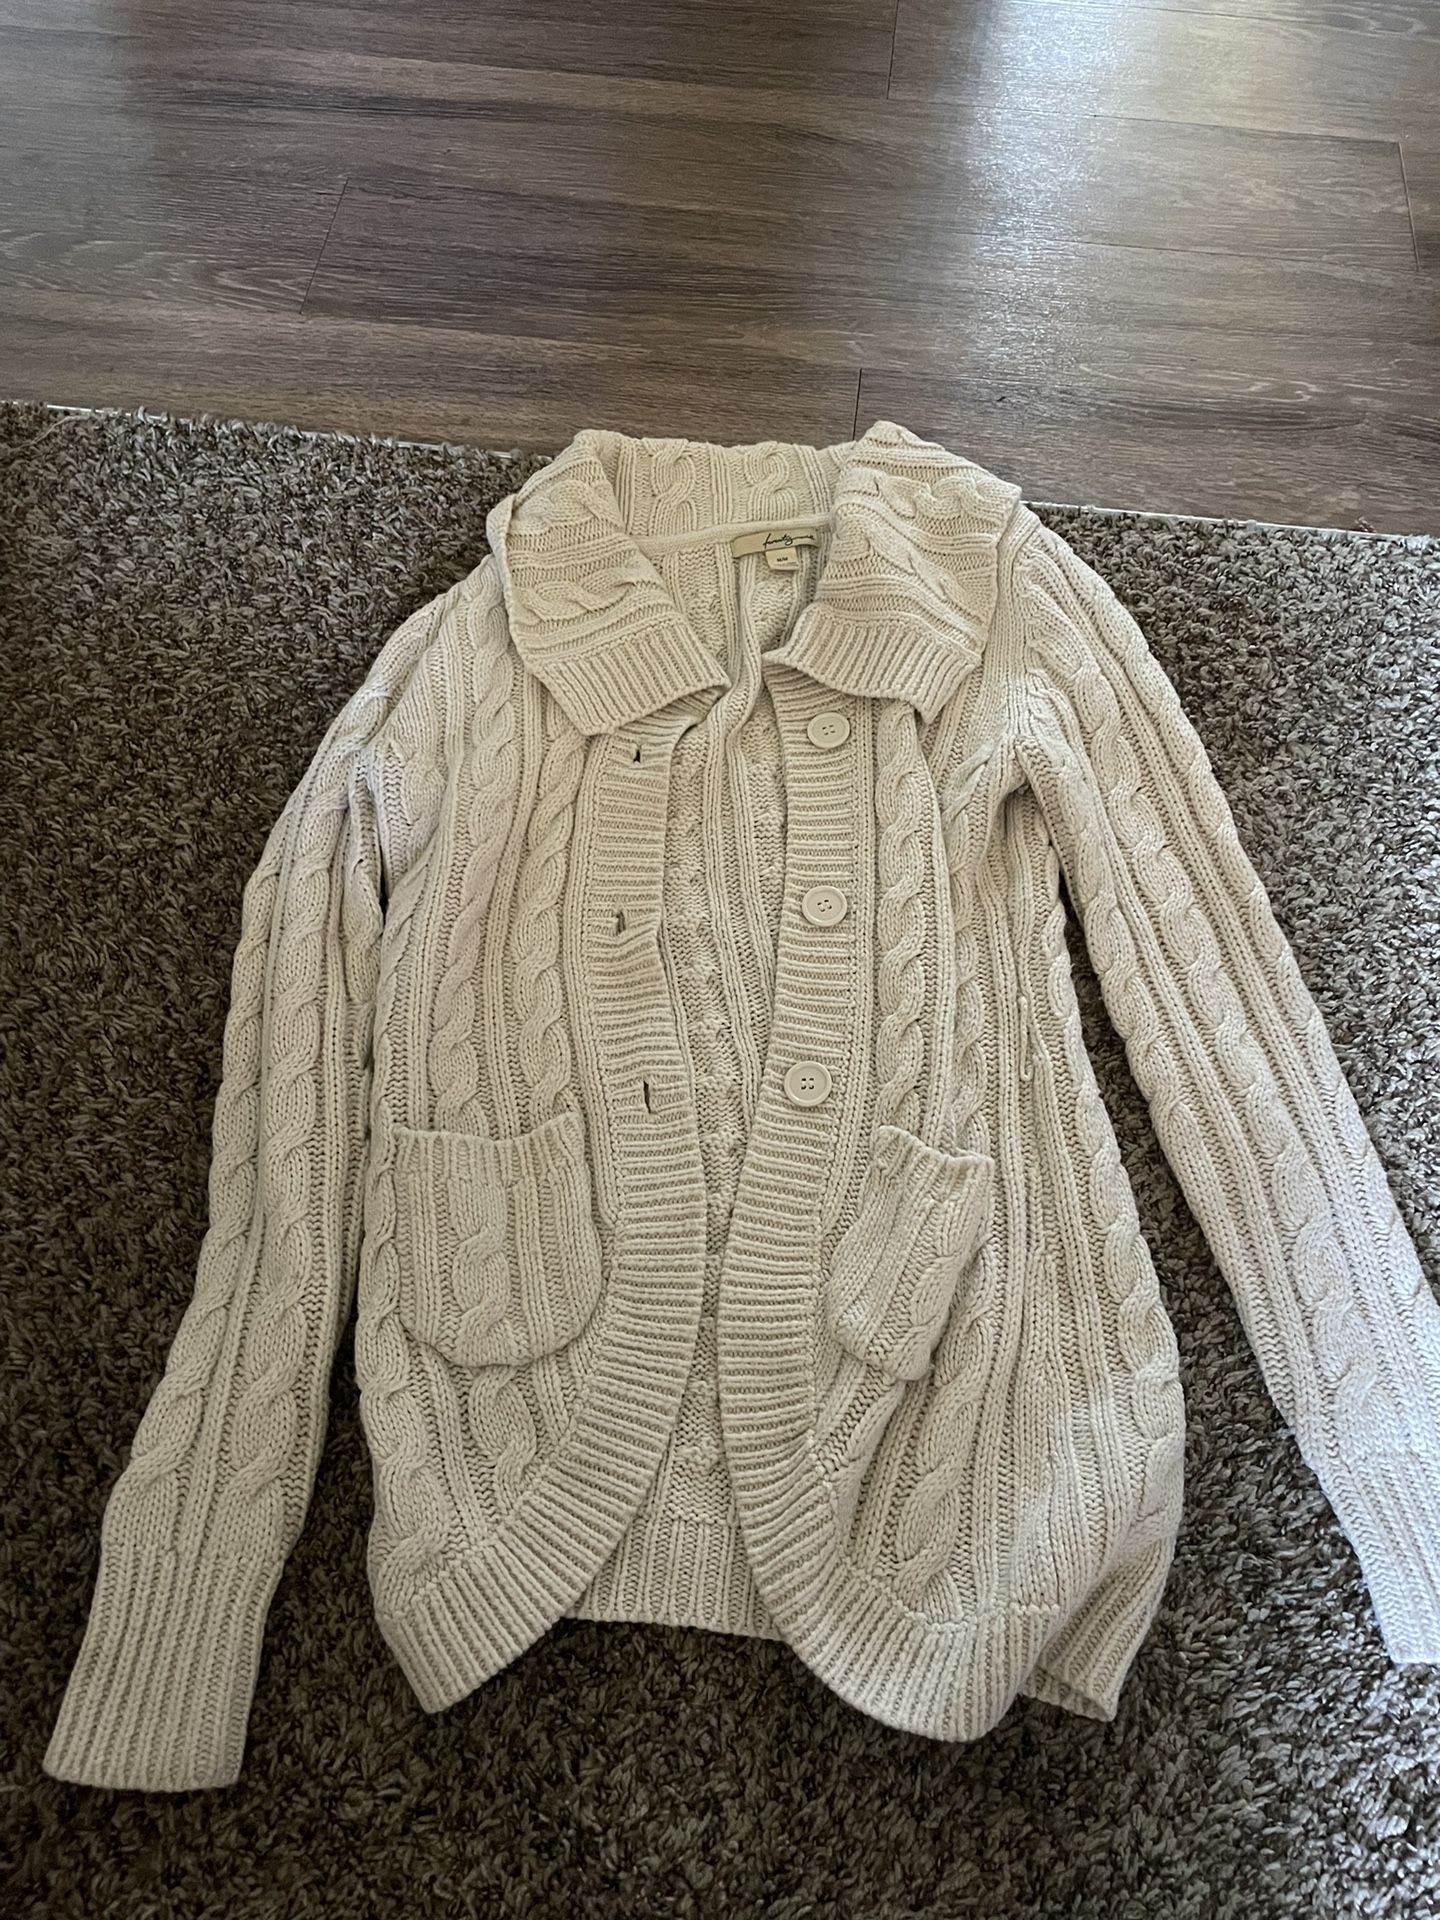 size medium woman’s knitted cardigan 